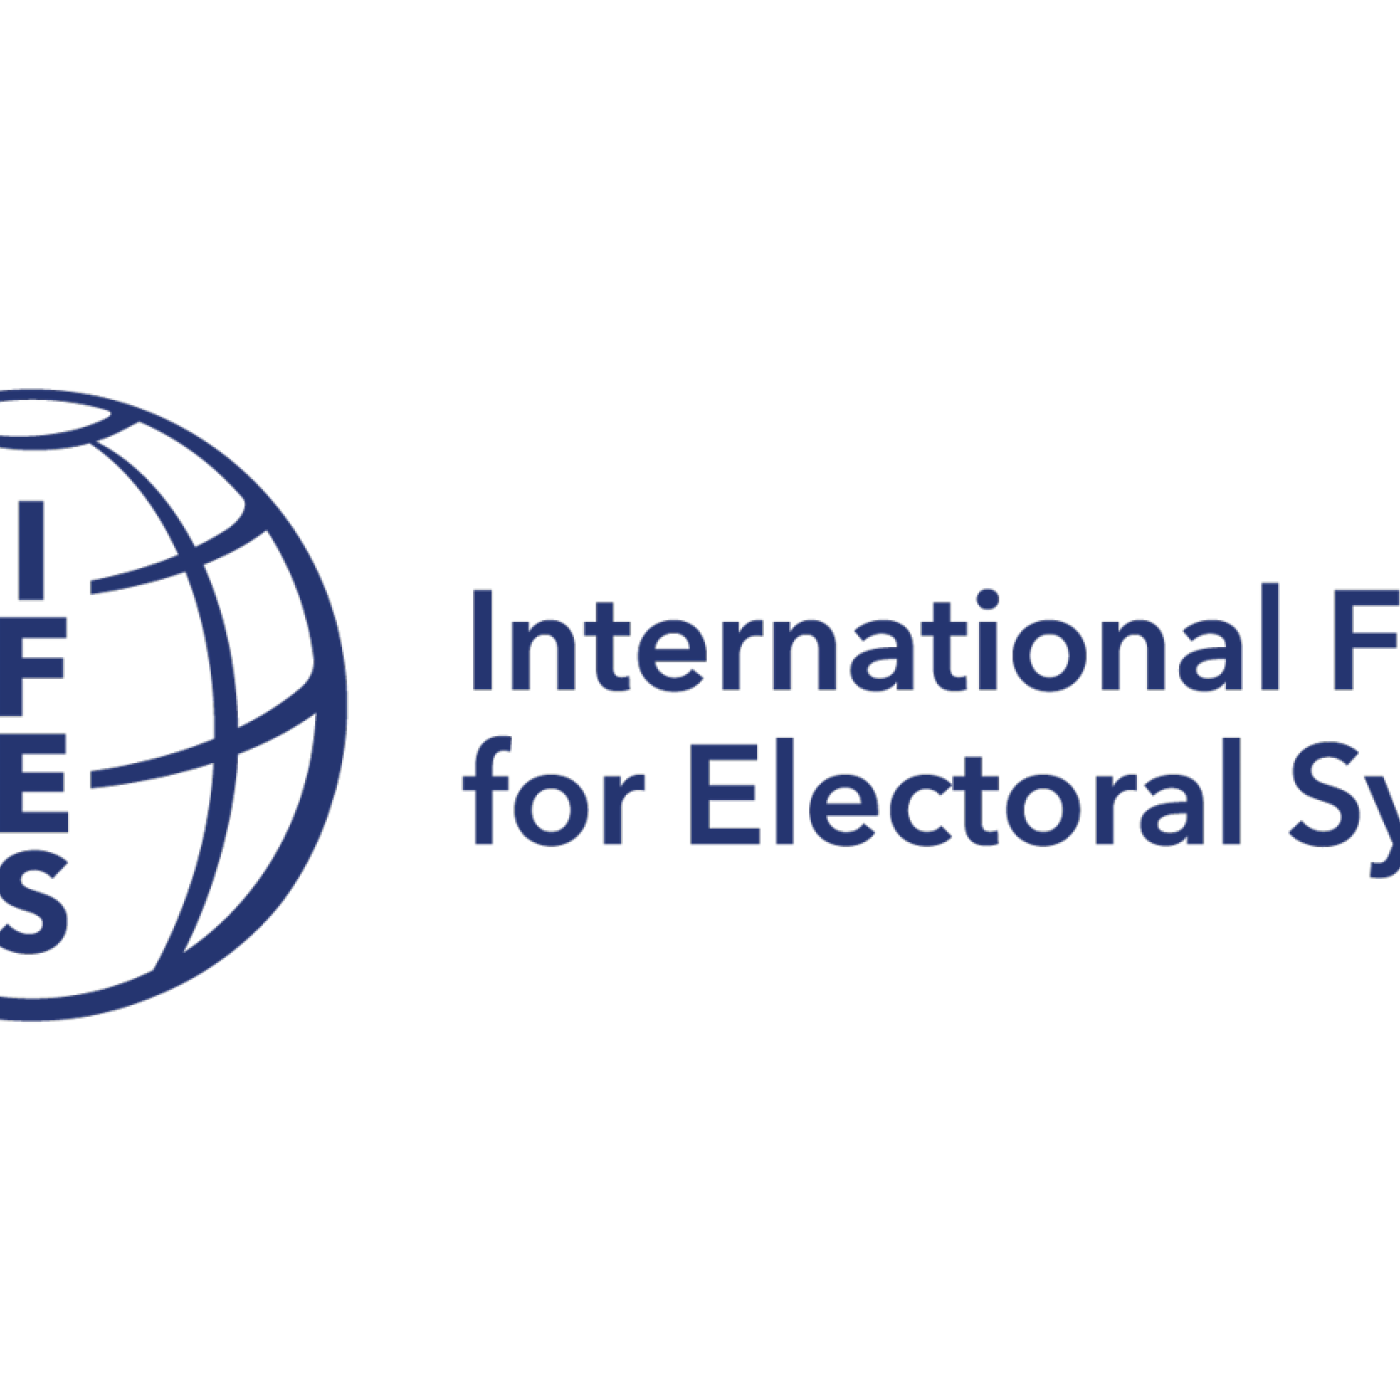 USAID, IFES and CEPPS logos